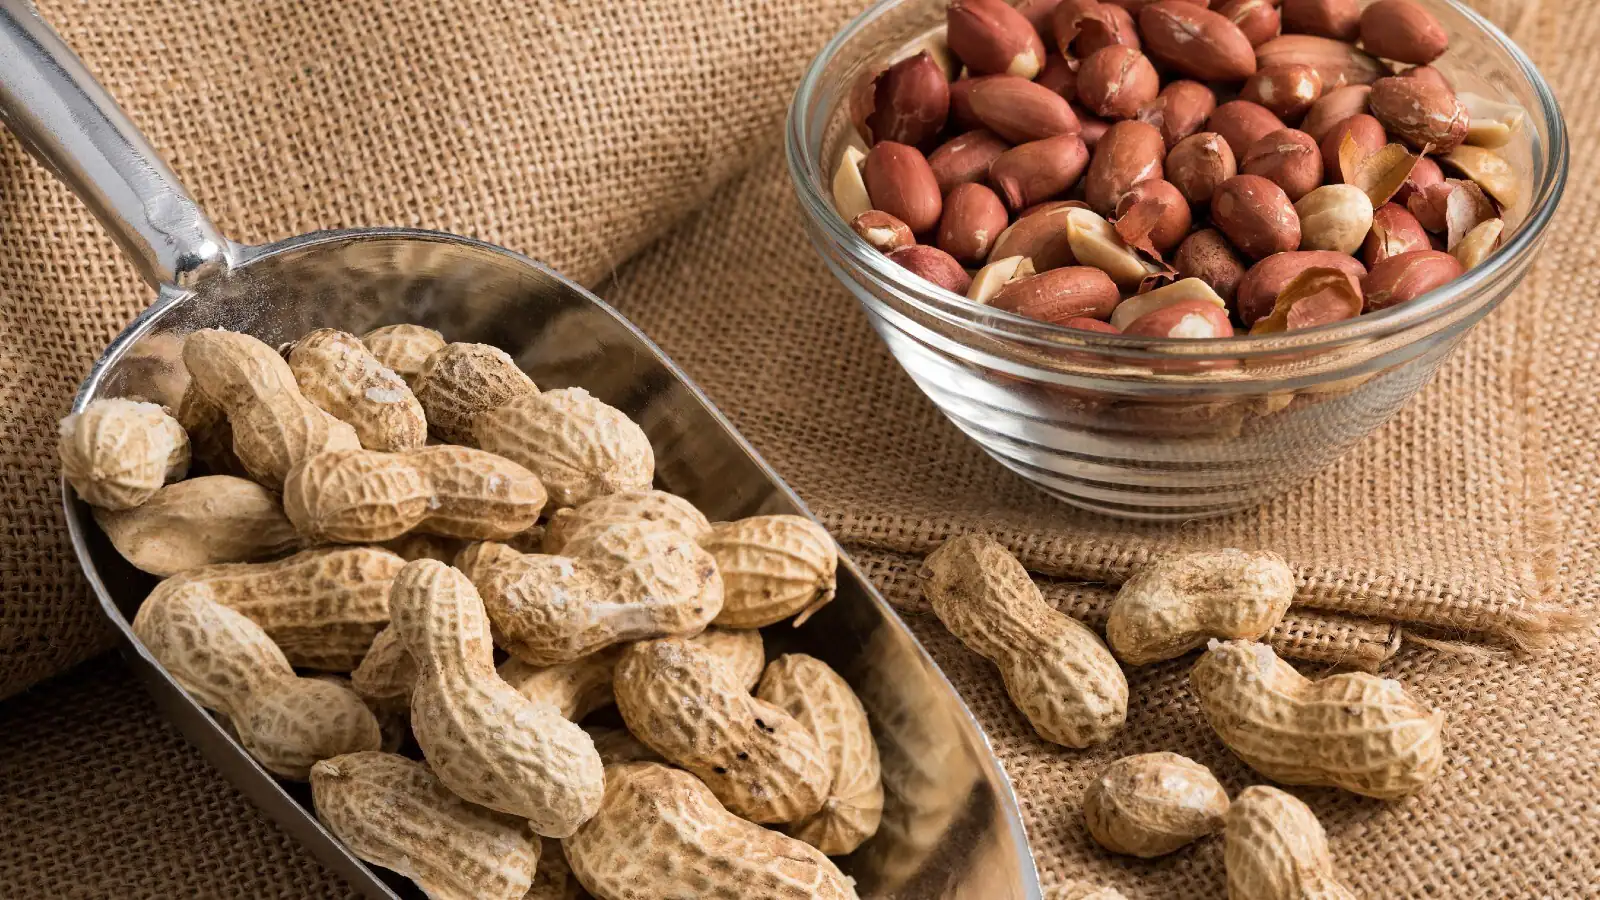 How Peanuts Can Help Men’s Wellbeing